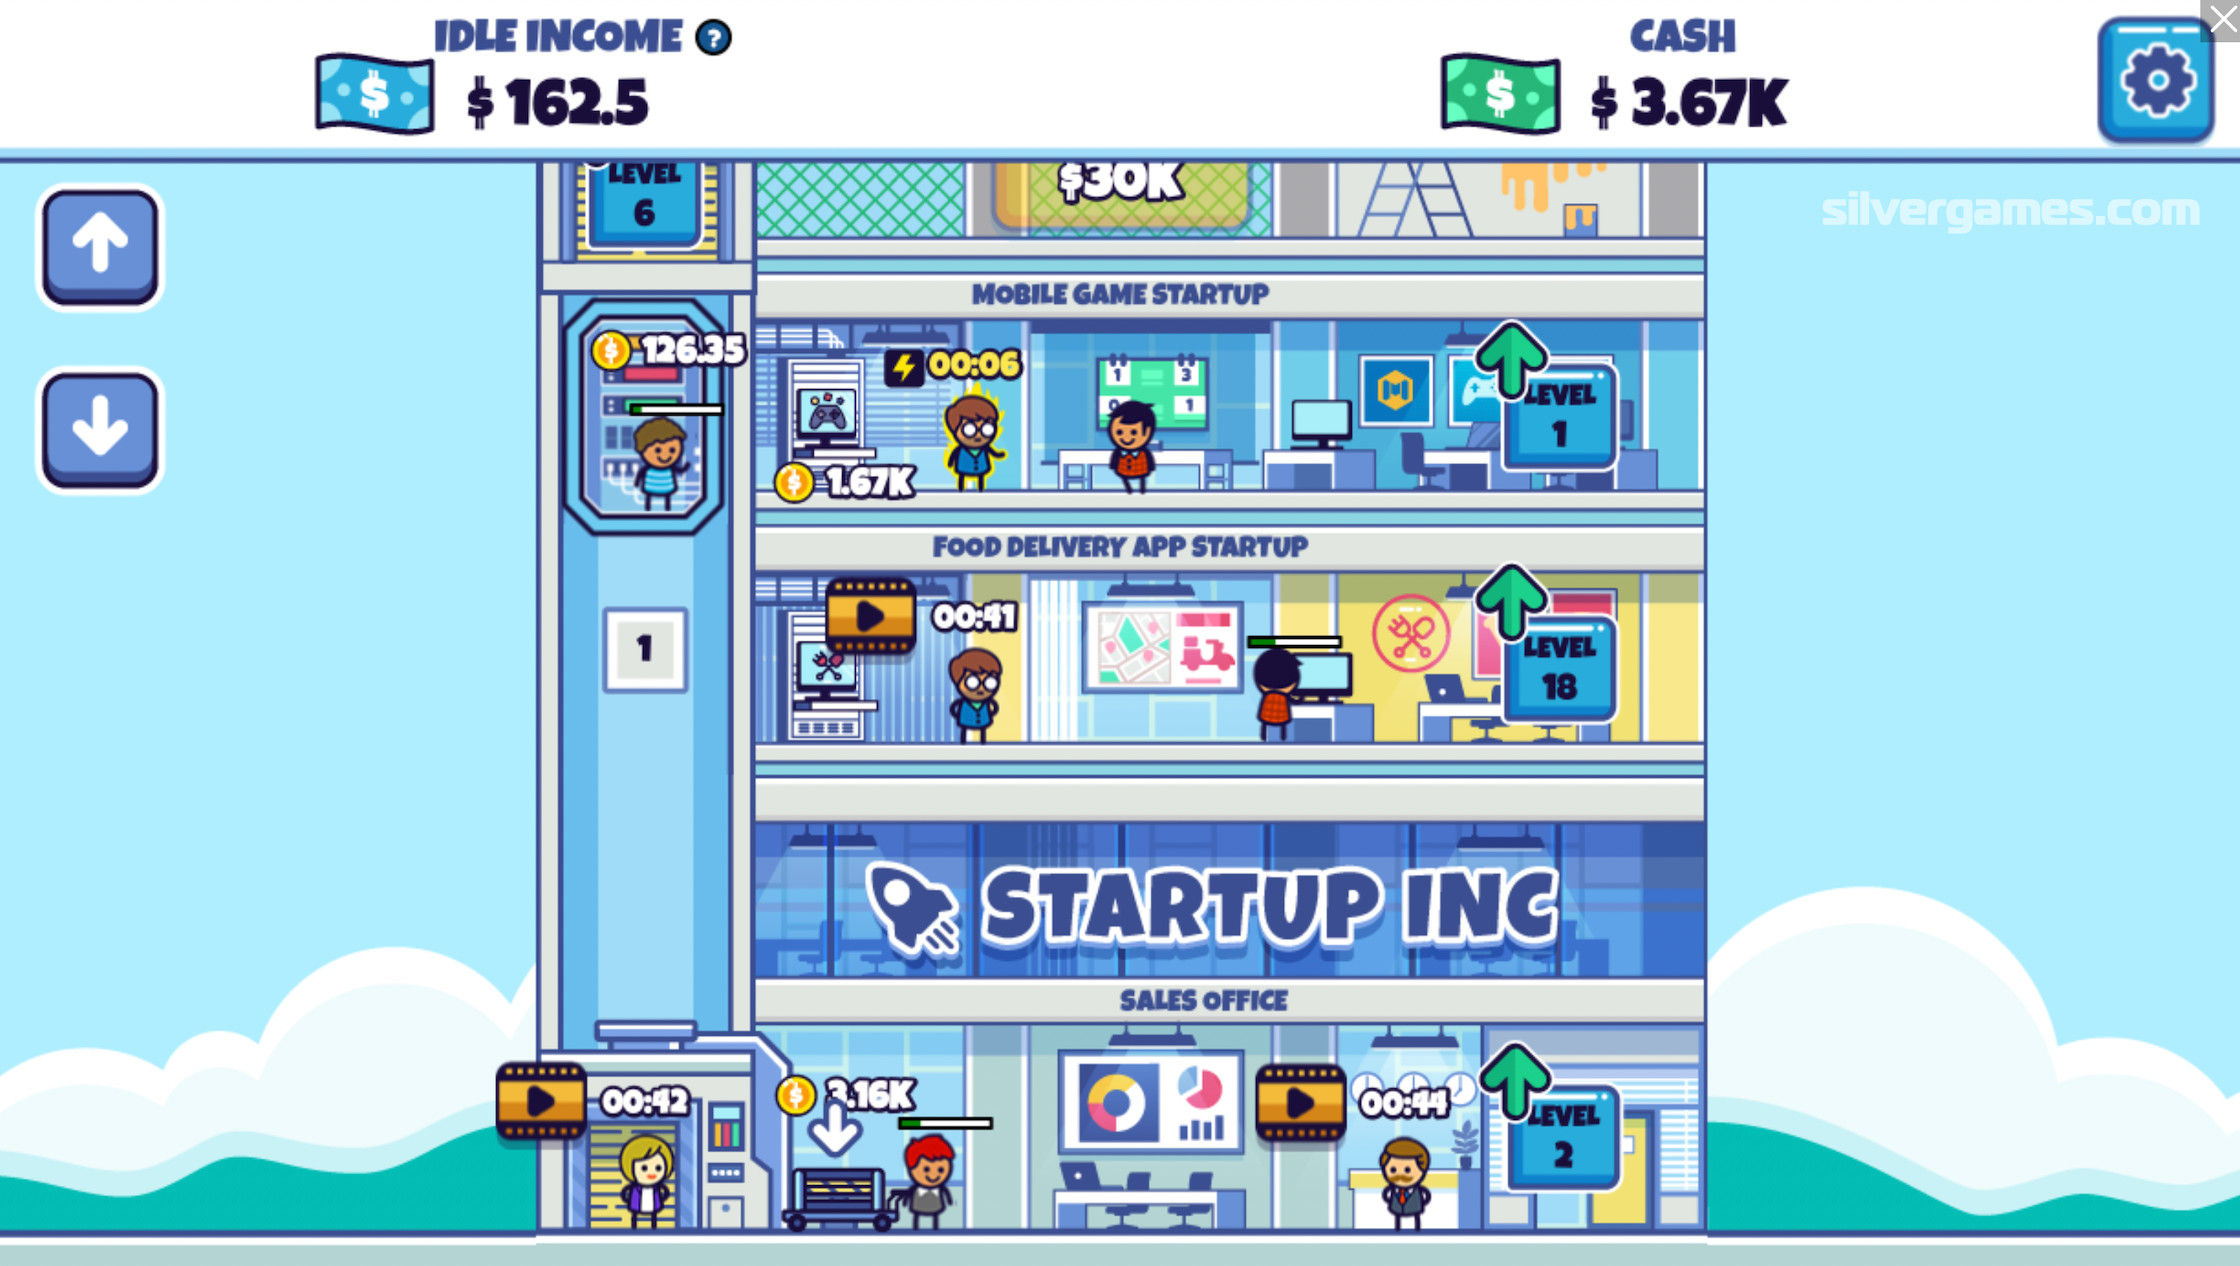 IDLE STARTUP TYCOON - Jogue Grátis Online!